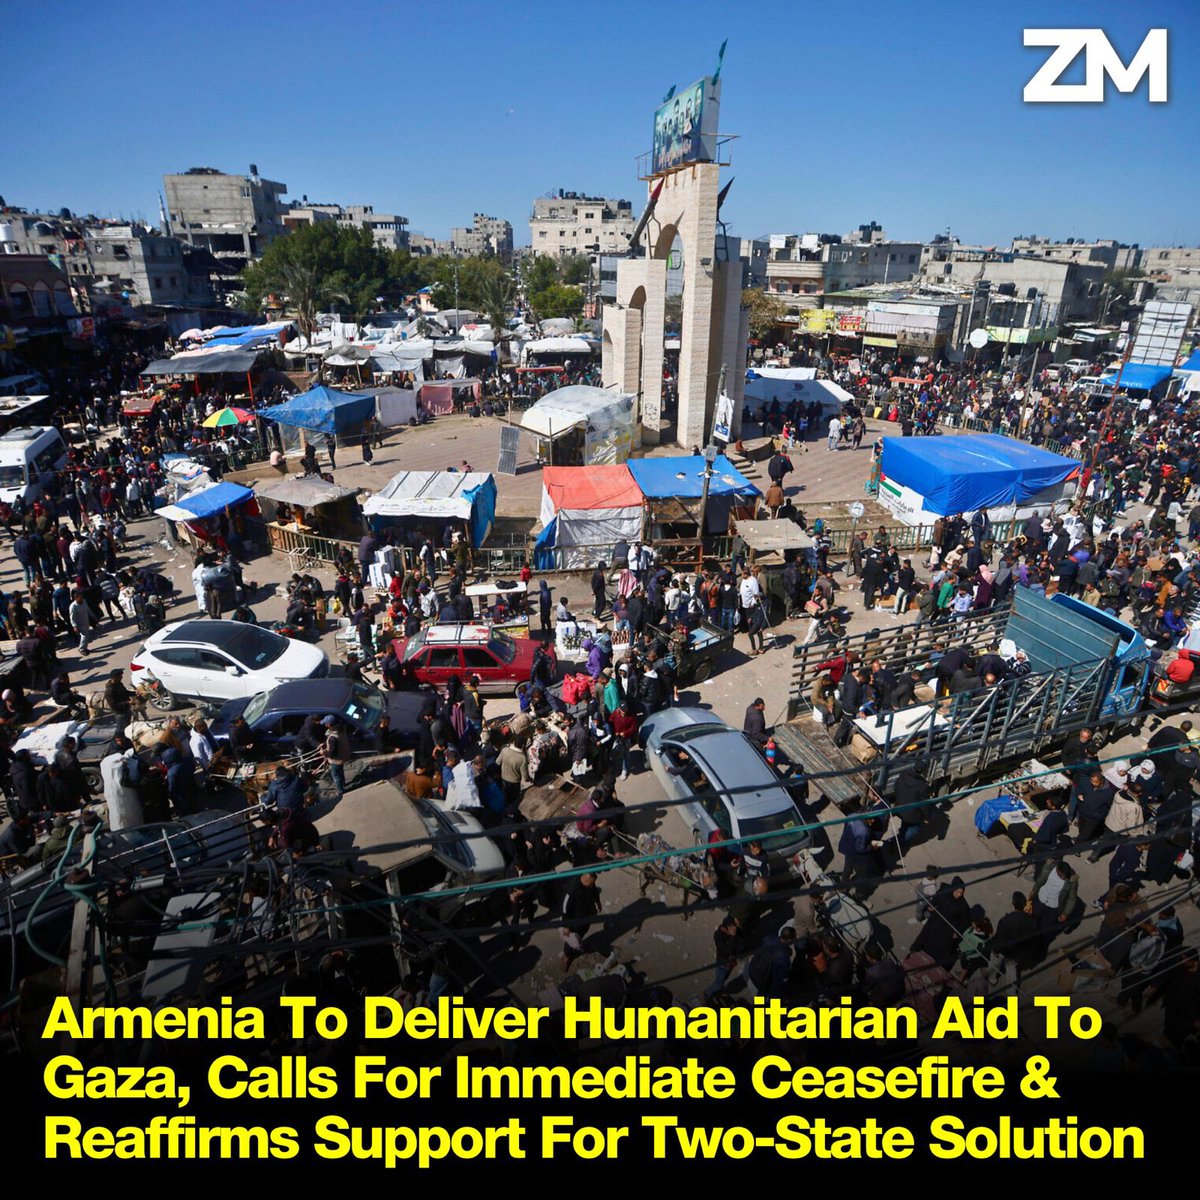 Armenia To Deliver Humanitarian Aid To Gaza, Calls For Immediate Ceasefire & Reaffirms Support For Two-State Solution